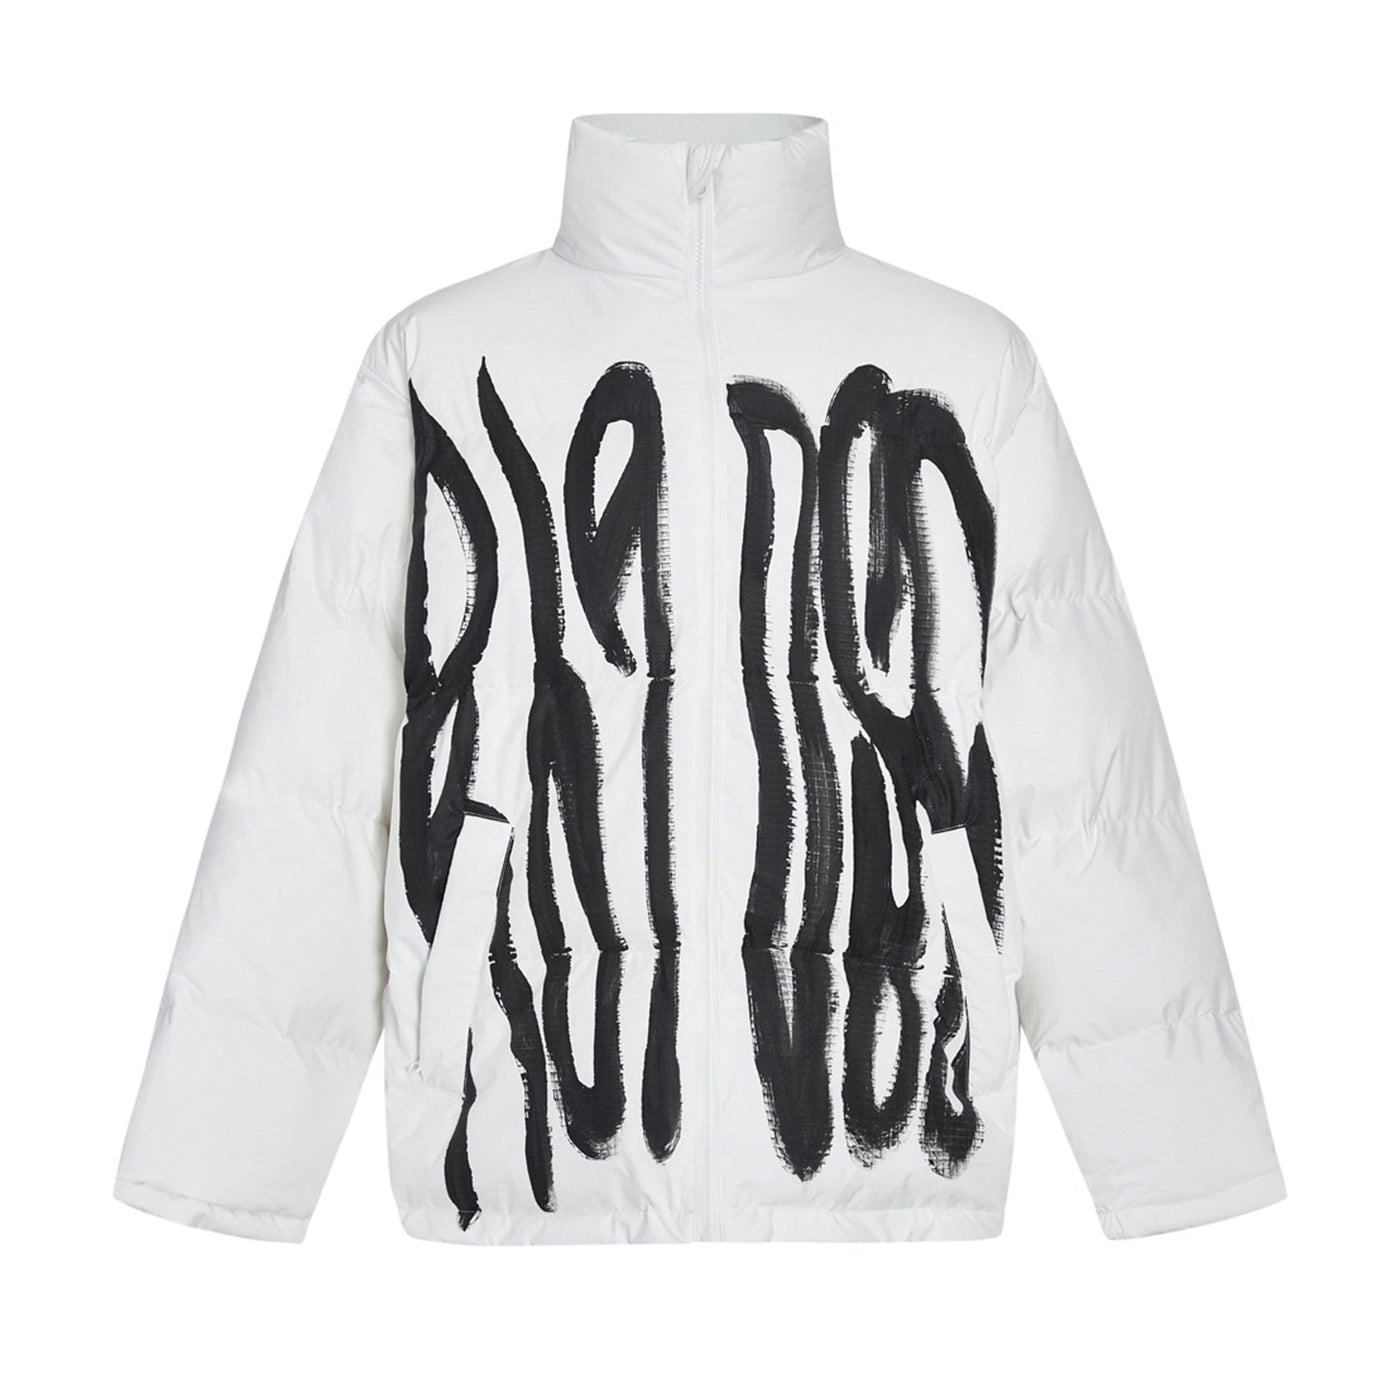 Handwriting Painted Puffer Jacket Korean Street Fashion Jacket By R69 Shop Online at OH Vault